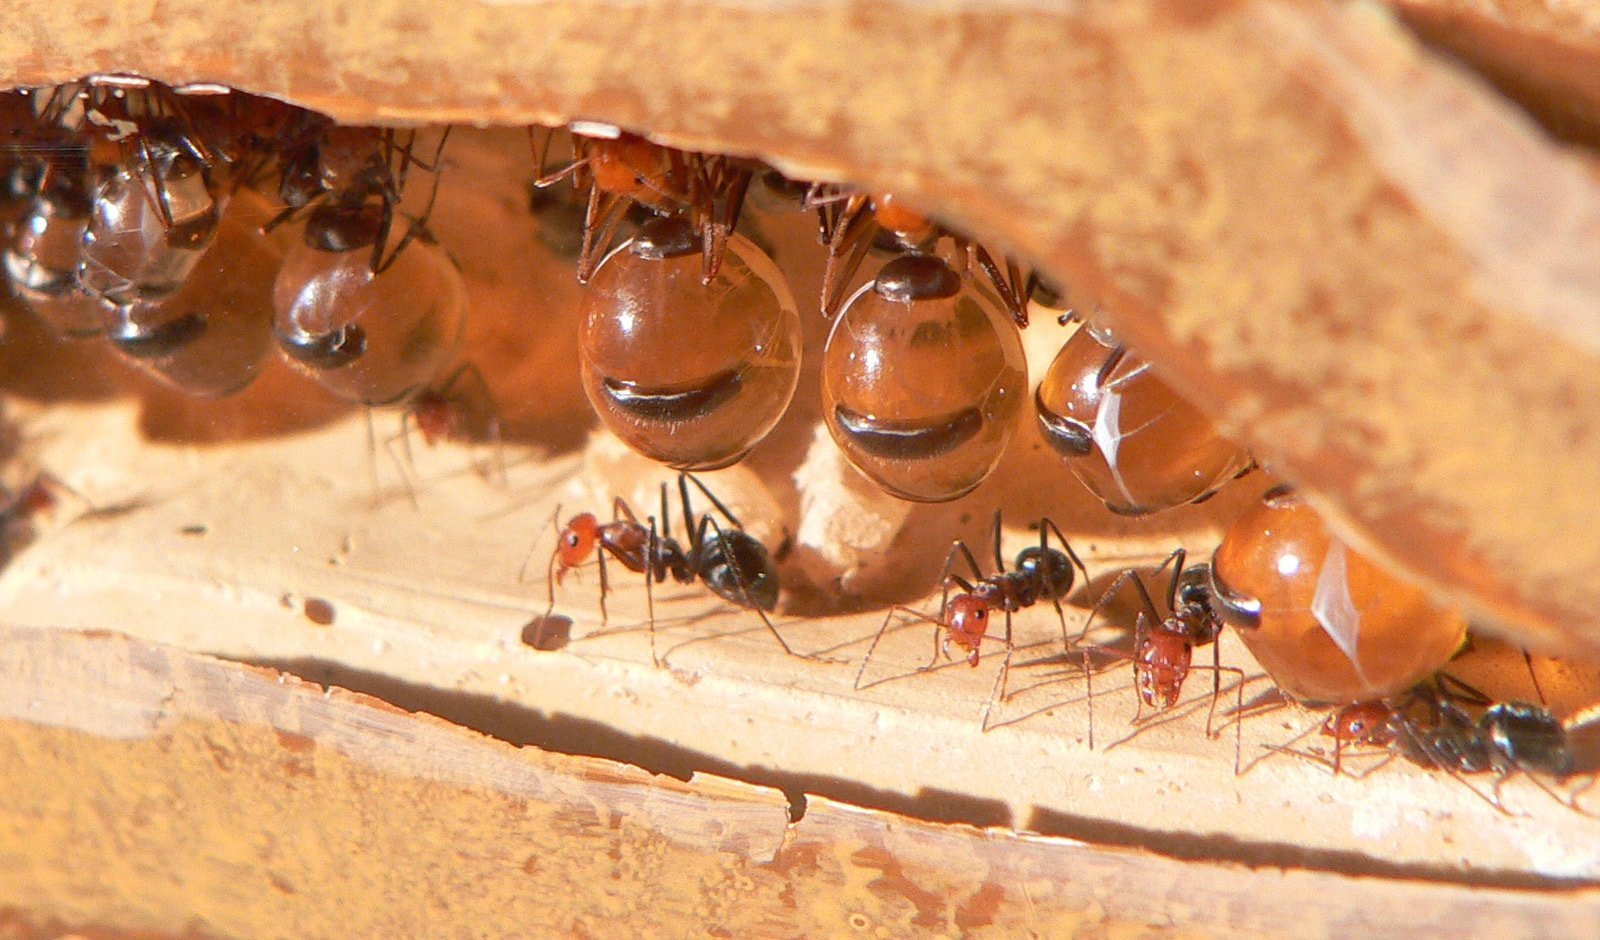 Wasps, bees and ants: nature's honey makers